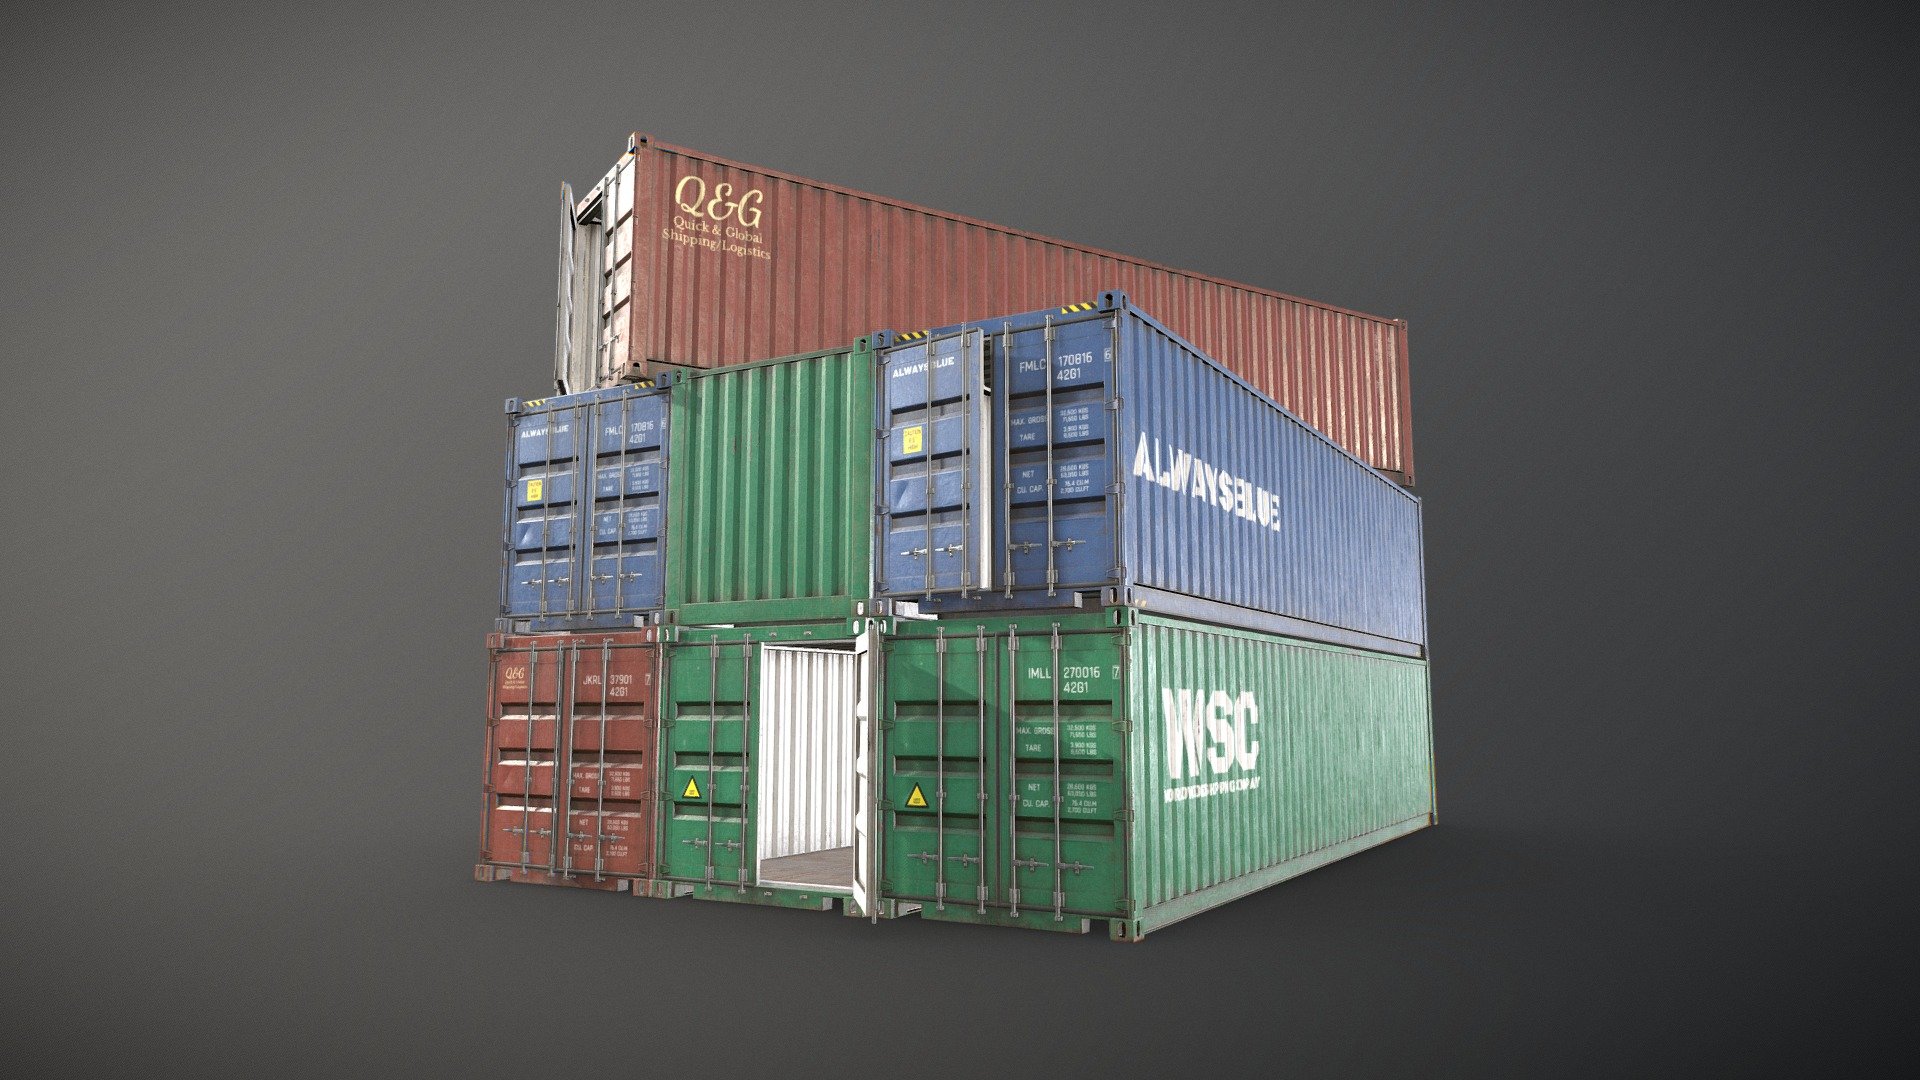 Game-Ready 3D model of a generic 40 feet Shipping Container with 3 different colors:




Real-world scale and centered.

The unit of measurement used for the model is centimeters

Approx. dimensions: Lenght - 1220cm / Height: 260cm / Width: 240cm

Low Poly: 3533 Polys (6524 tris) each

Doors are separated and can be easily rigged/animated.

PBR textures made in Substance Painter

All branding and labels are custom made.

Second uv channel included for lightmaps.

Packed ORM textures included for Unreal.

Maps sizes: 




Container: 4096x4096

Container Interior: 4096x4096

Provided Maps:




Albedo

Normal

Roughness

Metalness

AO

Formats Incuded - MAX / BLEND / OBJ / FBX 

This model can be used for any game, film, personal project, etc. You may not resell or redistribute any content - Shipping Container - Low Poly - Buy Royalty Free 3D model by MSWoodvine 3d model